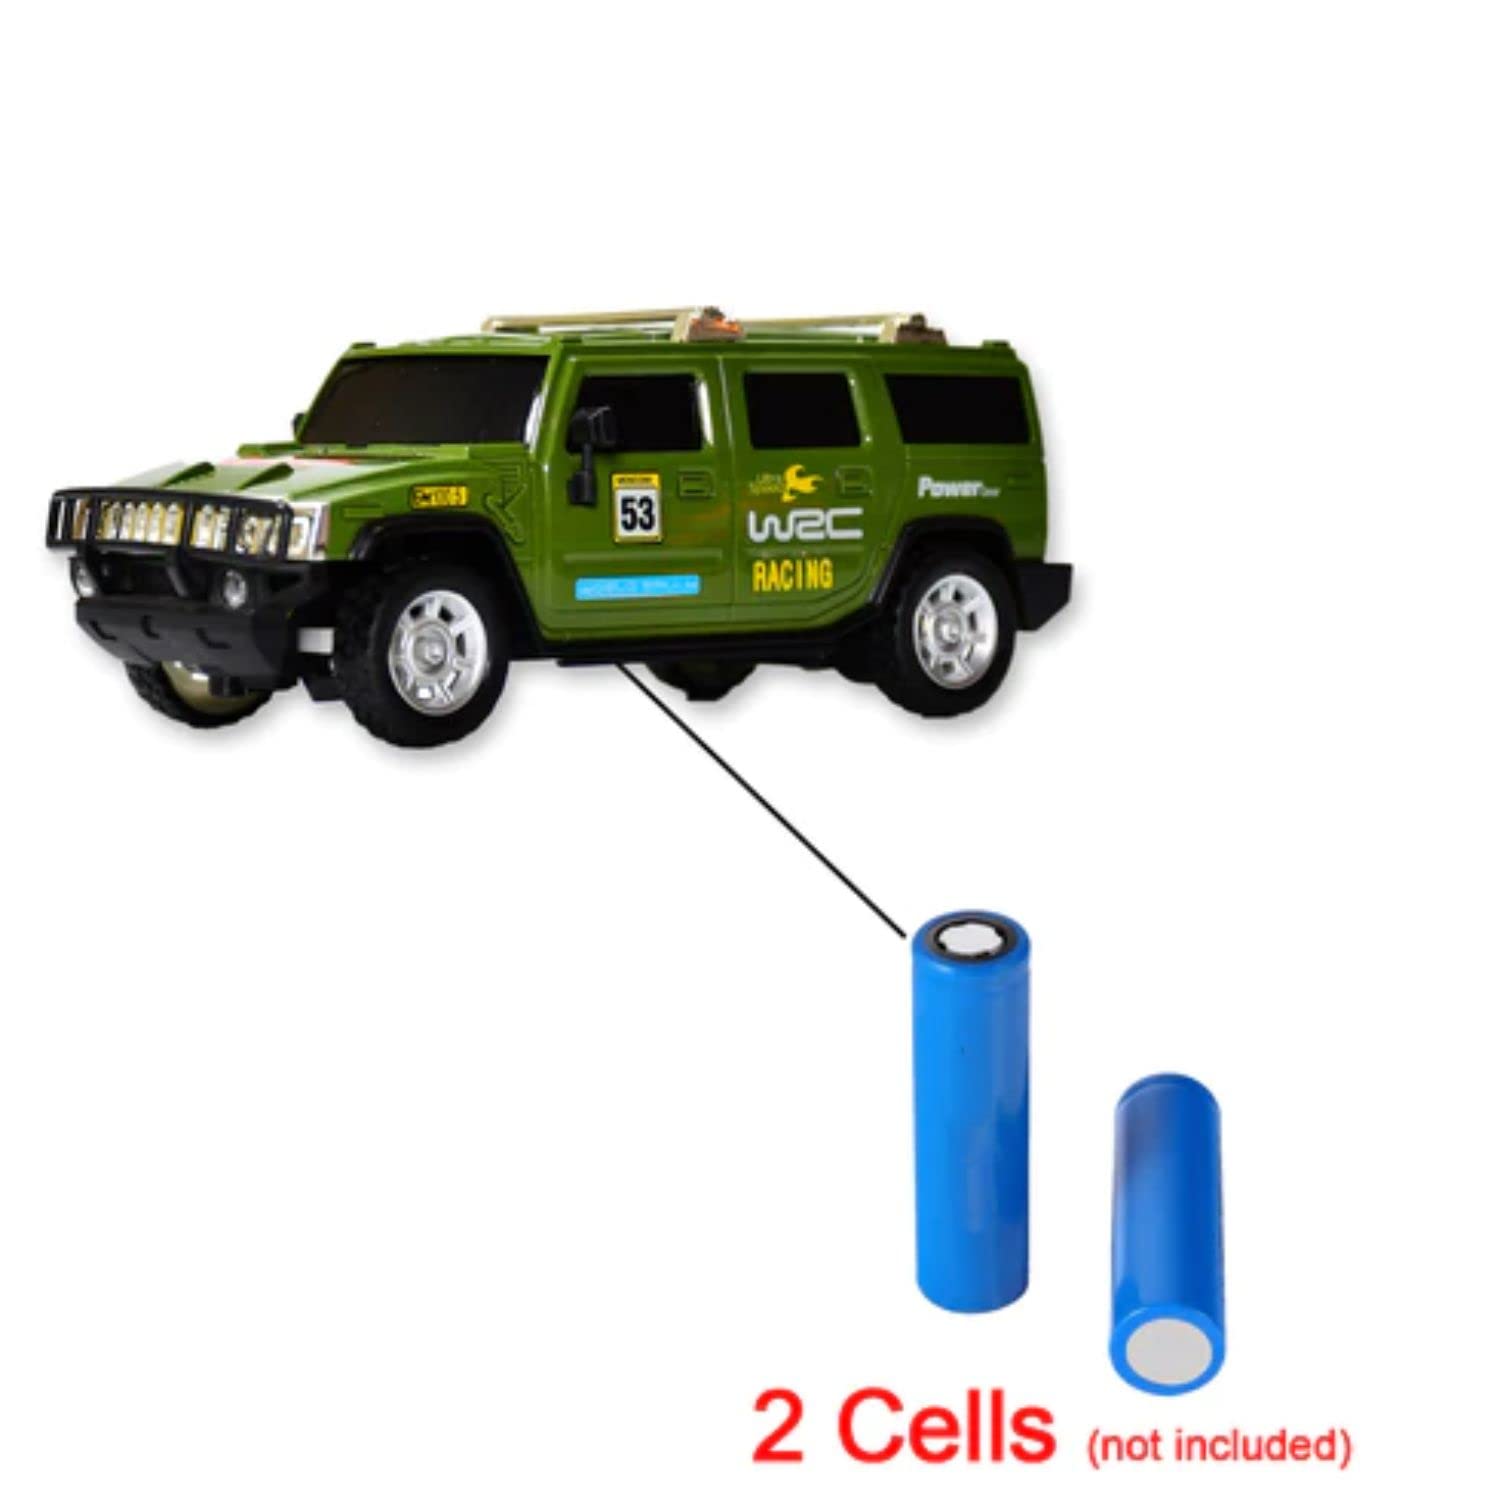 Kids Mandi off-road remote control Jeep car toy, pack of 1.